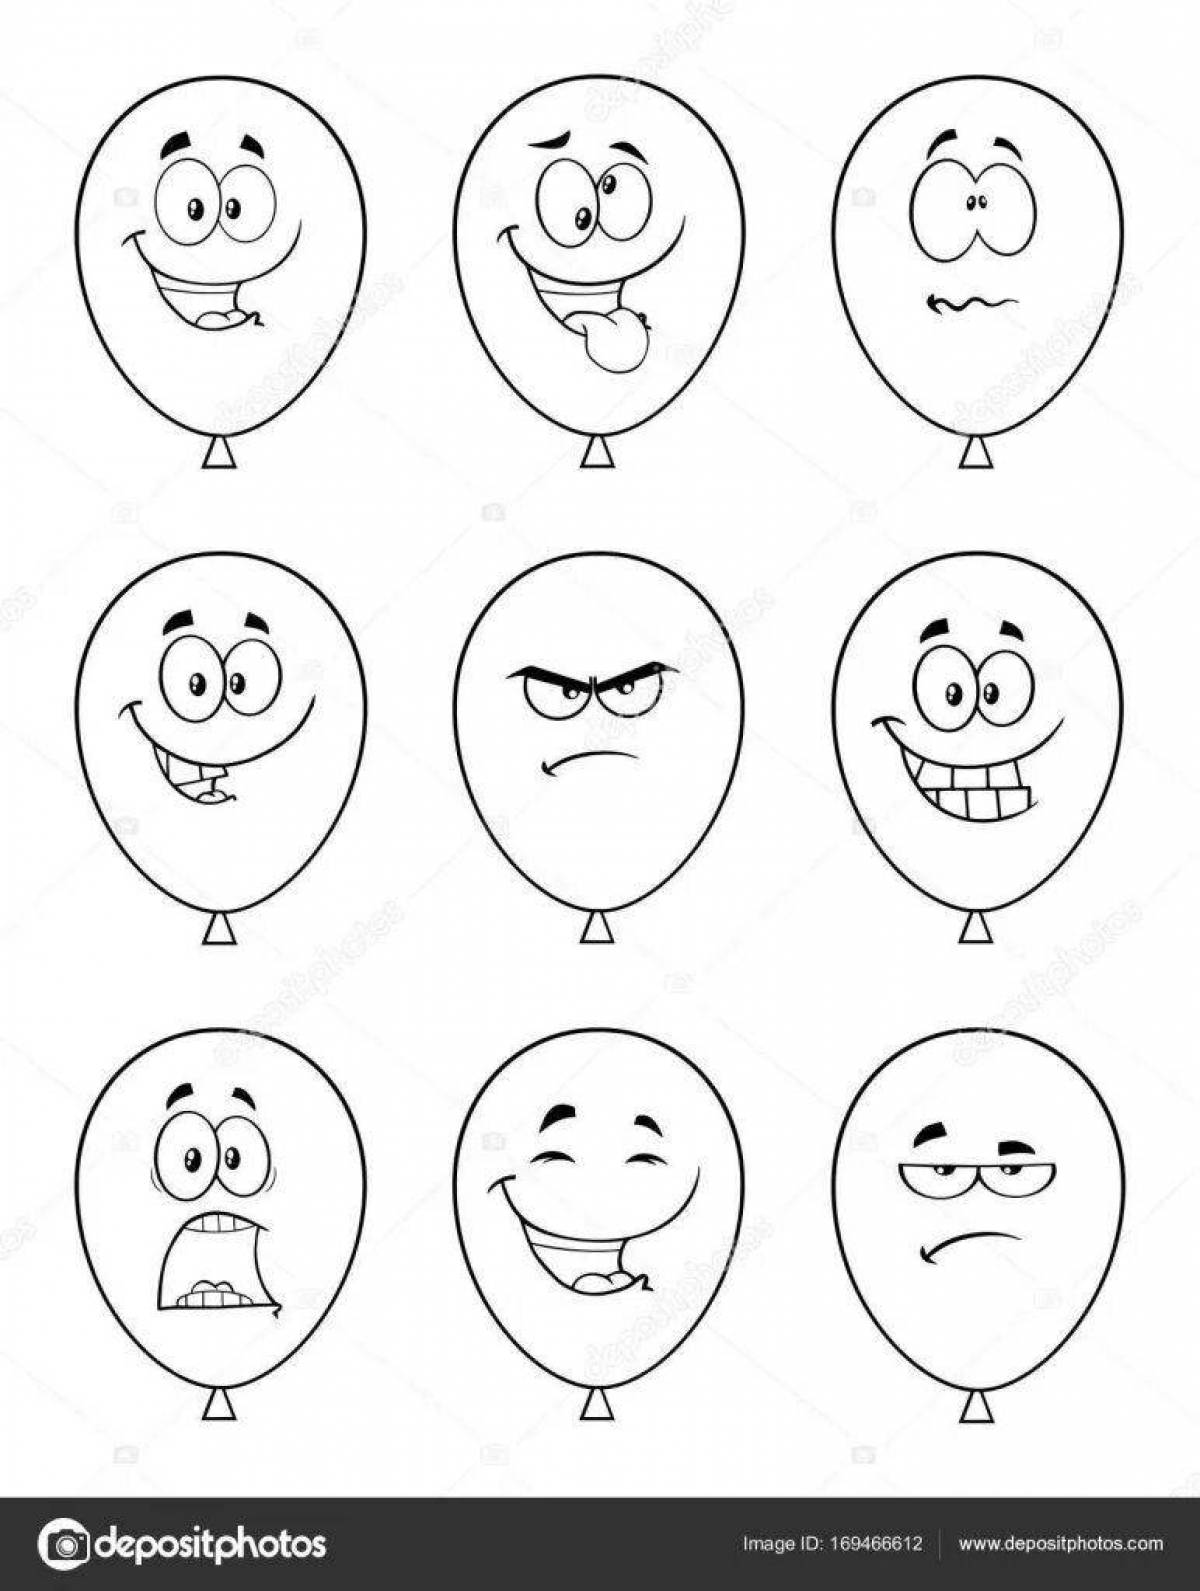 Playful coloring of emotions for children